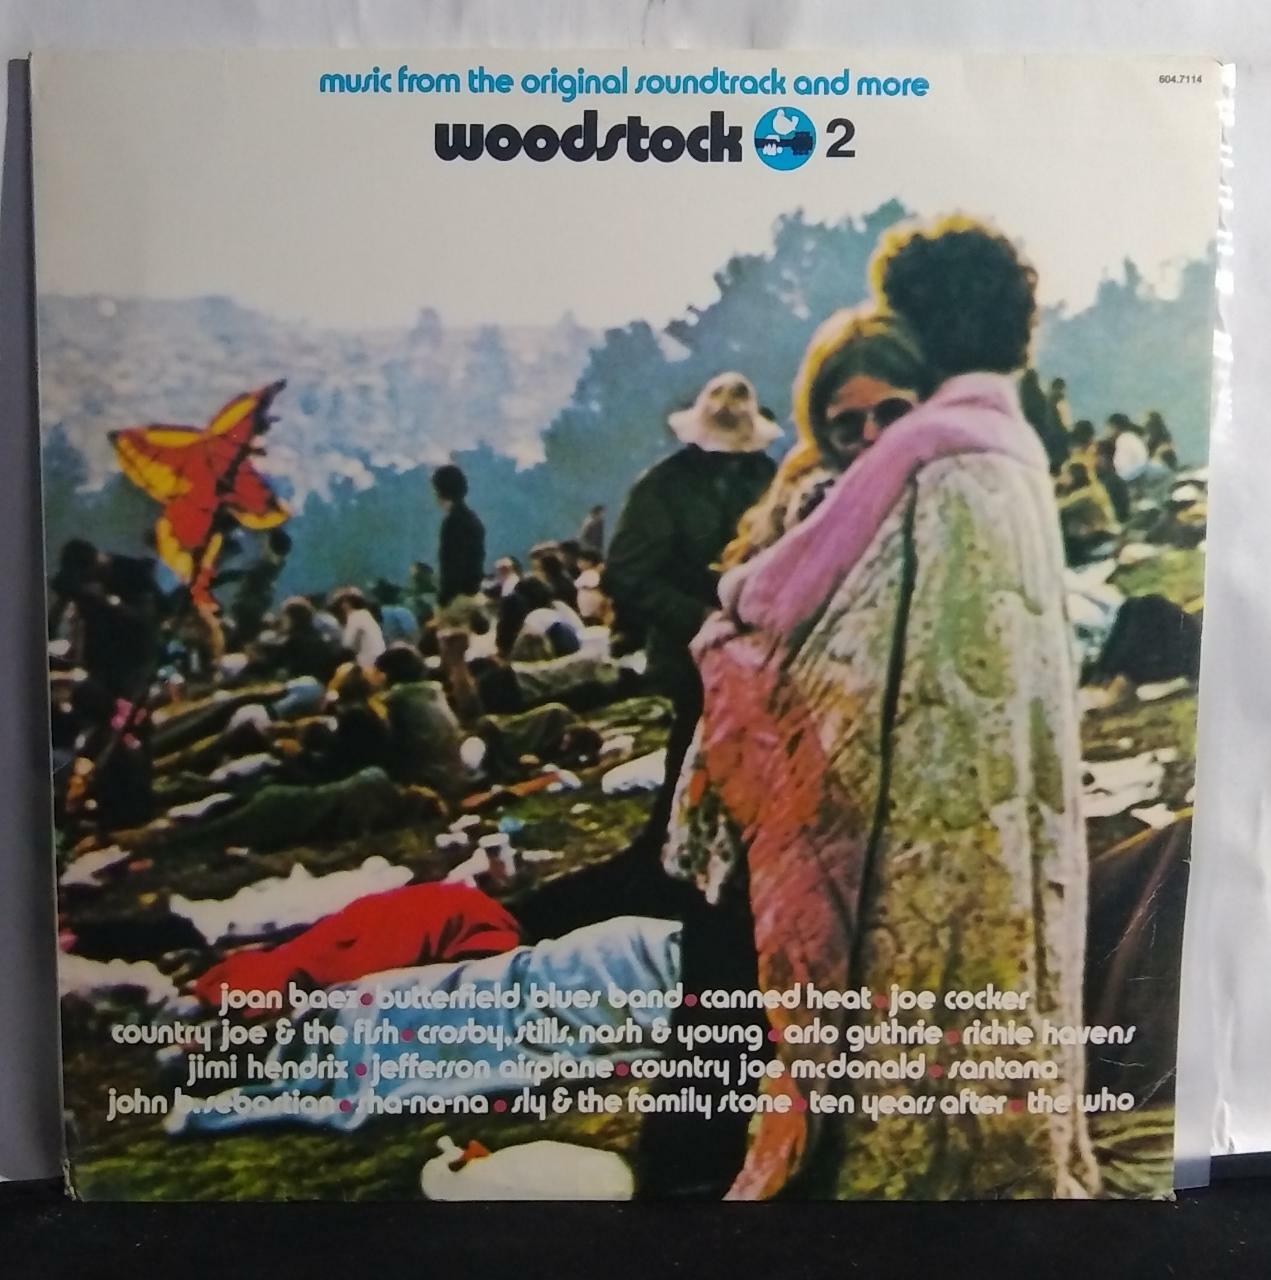 Vinil - Woodstock 2 - Music from the Original Soundtrack and More